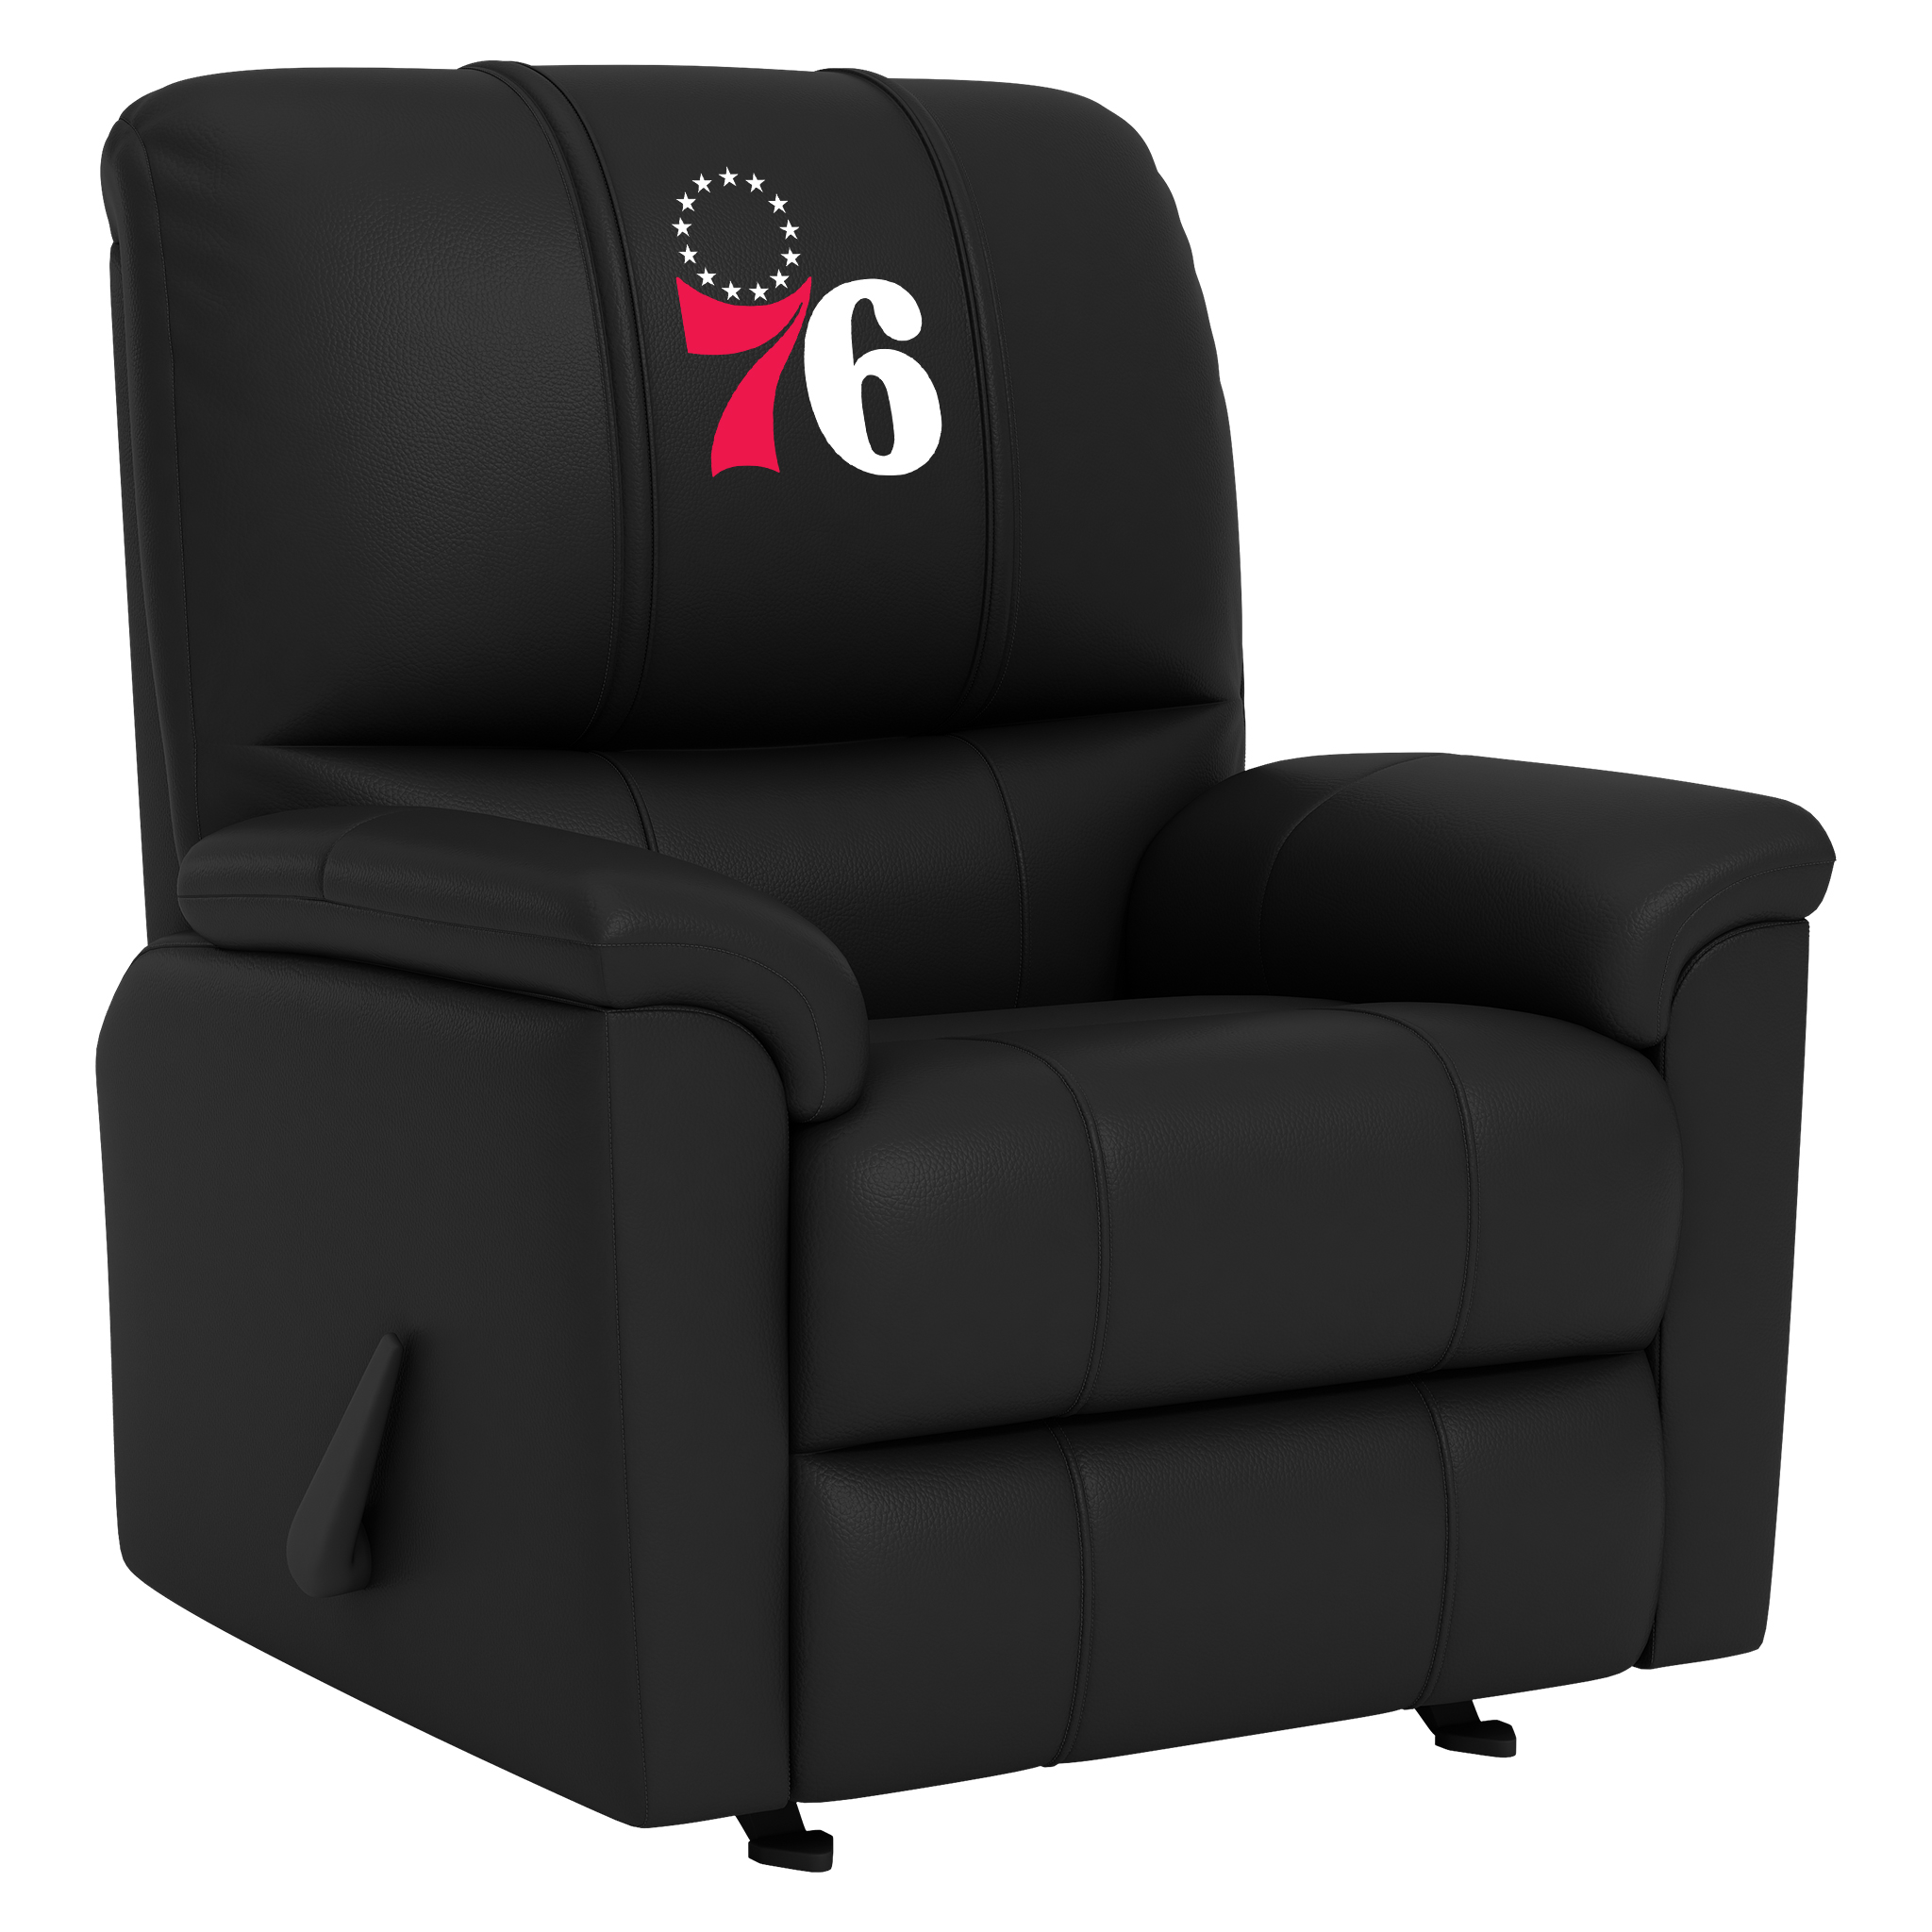 Minnesota Timberwolves Silver Club Chair with Minnesota Timberwolves Primary Logo